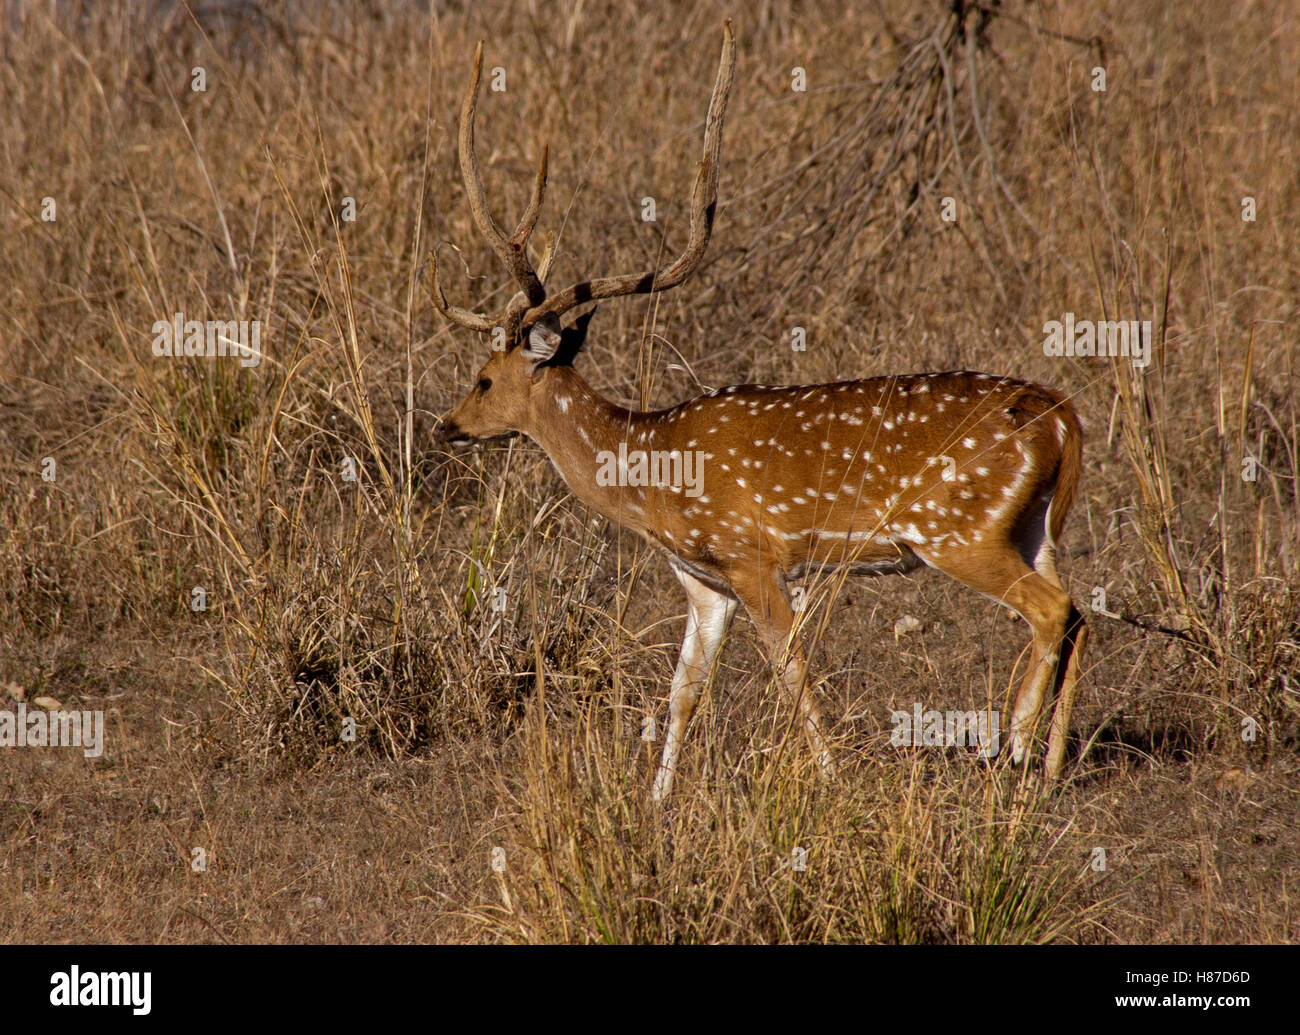 Indian Male Deer called a Chital in native habitat of Kanha National Park of India. Spotted deer with long antlers walking Stock Photo